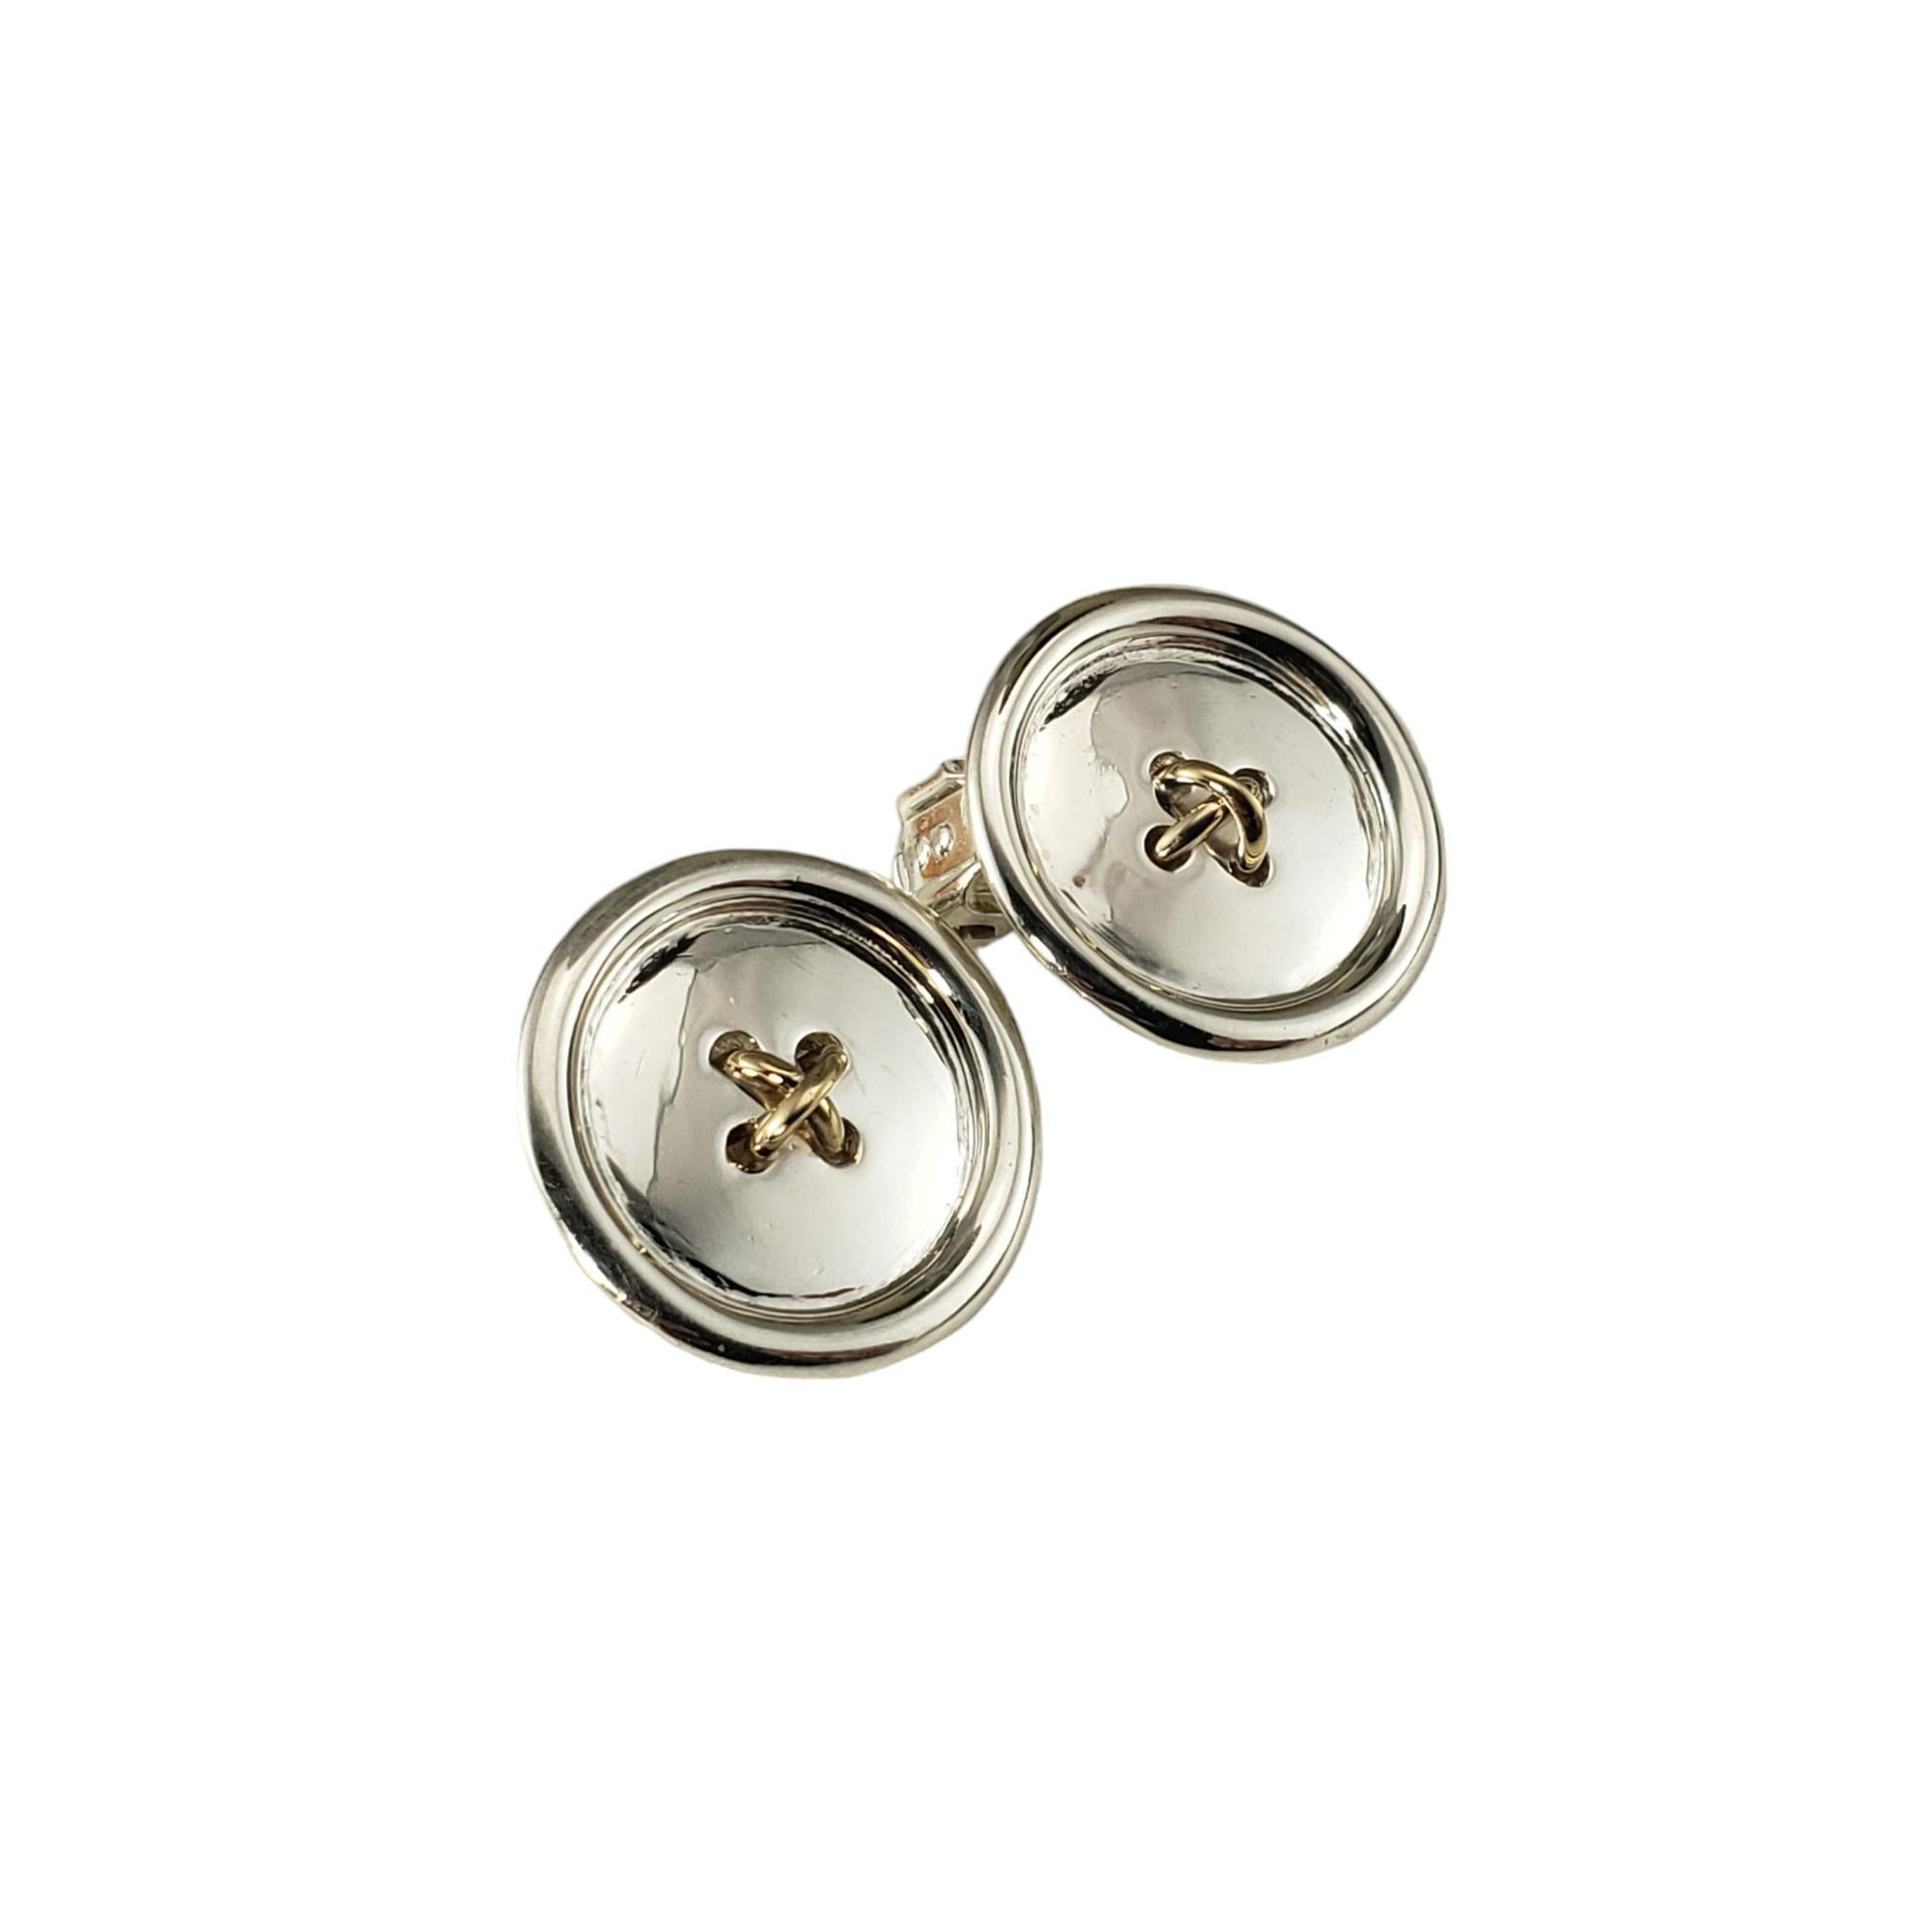 Vintage Tiffany & Co. Sterling Silver Button Clip On Earrings #17294 In Good Condition For Sale In Washington Depot, CT